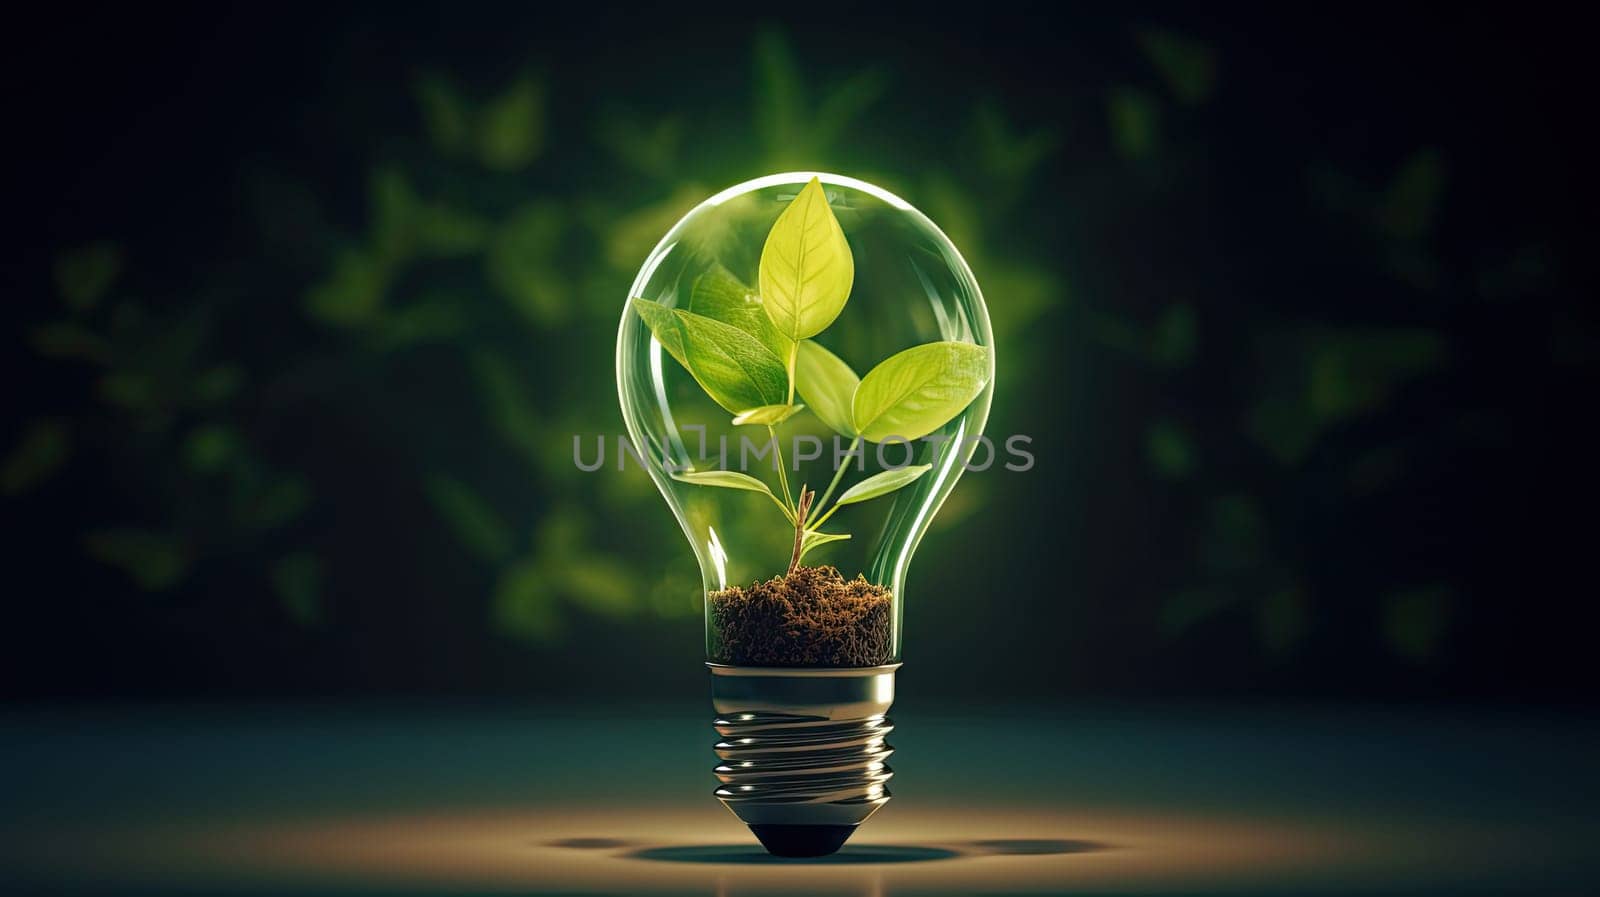 Eco friendly lightbulb from fresh leaves top view, concept of renewable energy and sustainable living by Kadula